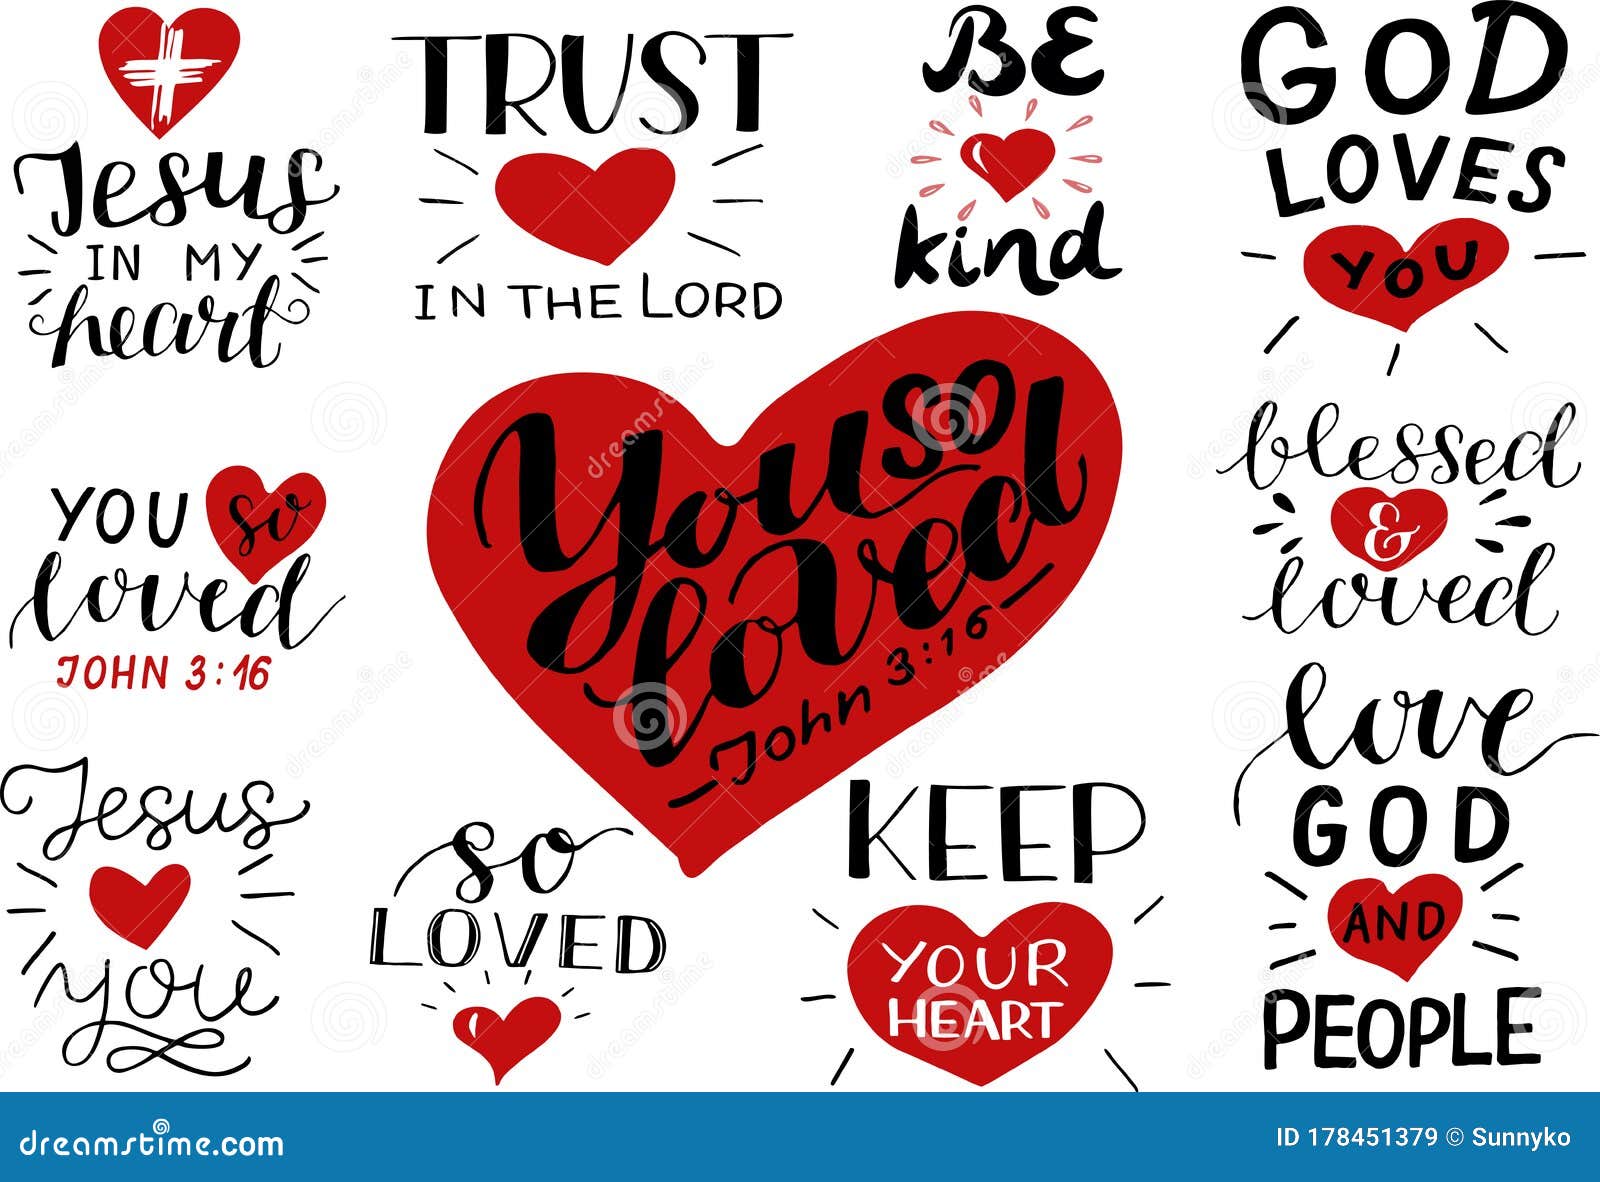 Logo Set With Bible Verse And Christian Quotes You So Loved Trust In The Lord Be Kind Jesus In My Heart Stock Vector Illustration Of Decoration Icon